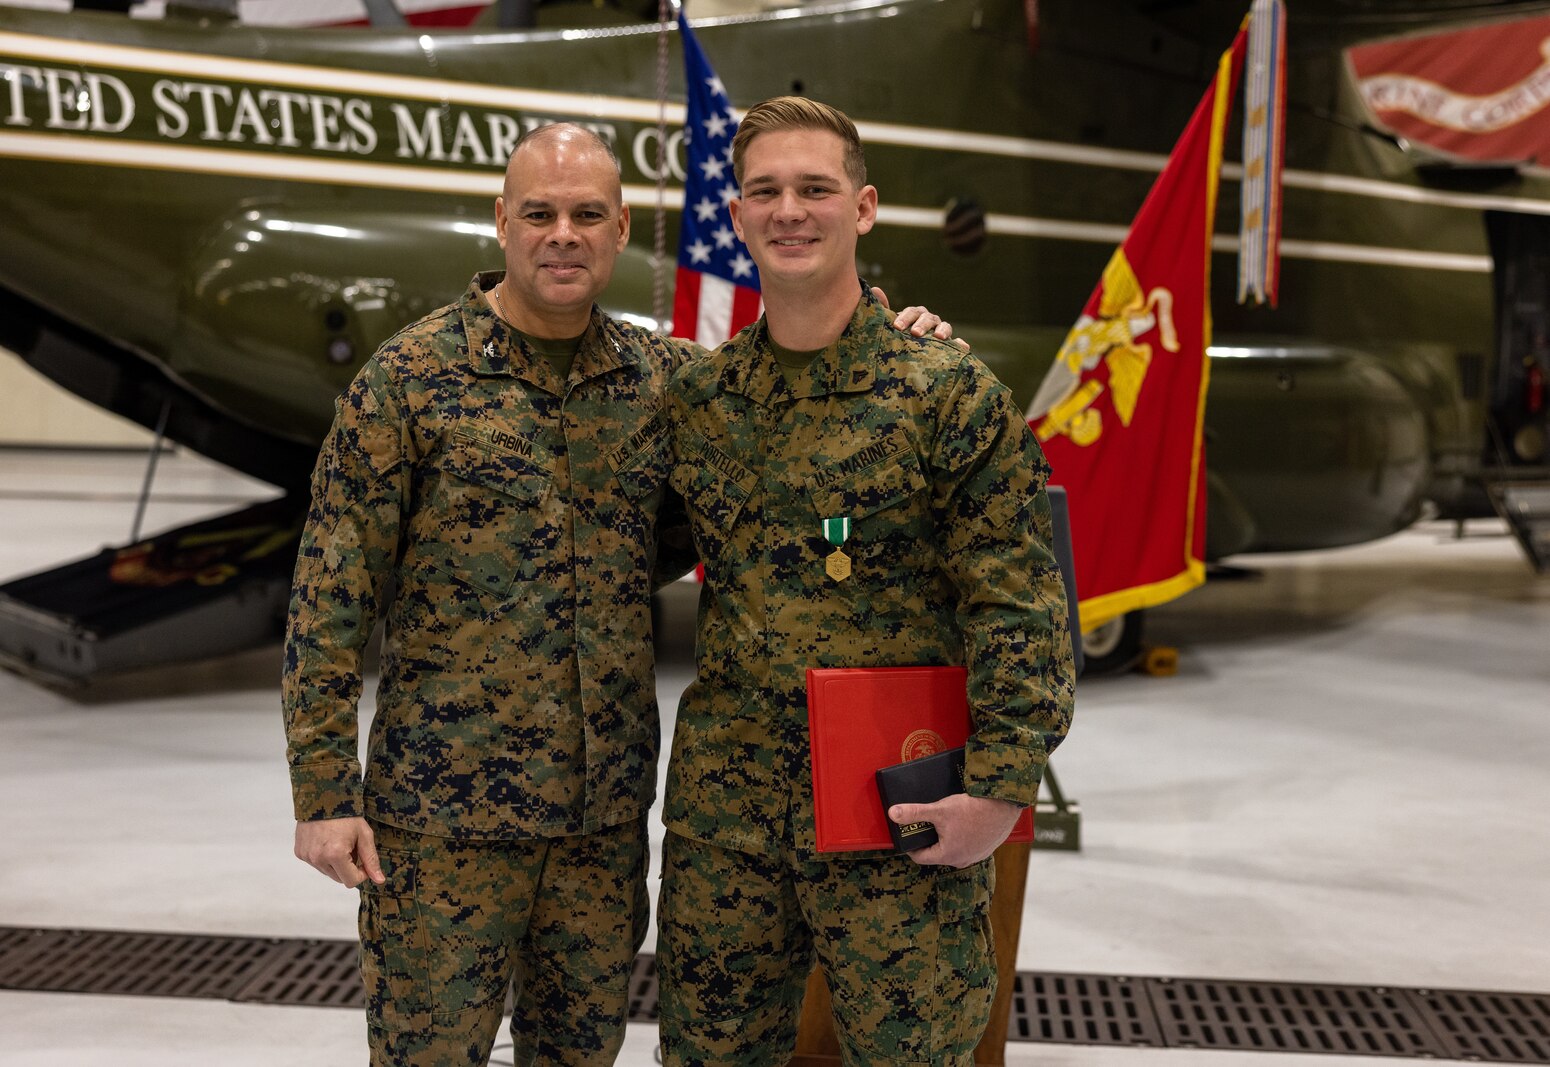 U.S. Marine Corps Cpl. Chase Portello, a noncommissioned officer with Marine Helicopter Squadron One, right, poses for a photo with U.S. Marine Corps Col. Carlos Urbina, the director of Command Element Information Division, left, after his award ceremony at Marine Corps Base Quantico, Virginia, Dec. 16, 2022. Portello received a Navy Commendation Medal for his actions on Nov. 14, 2022, saving the life of Col. Carlos Urbina. (U.S. Marine Corps photos by Lance Cpl. Joaquin Dela Torre)